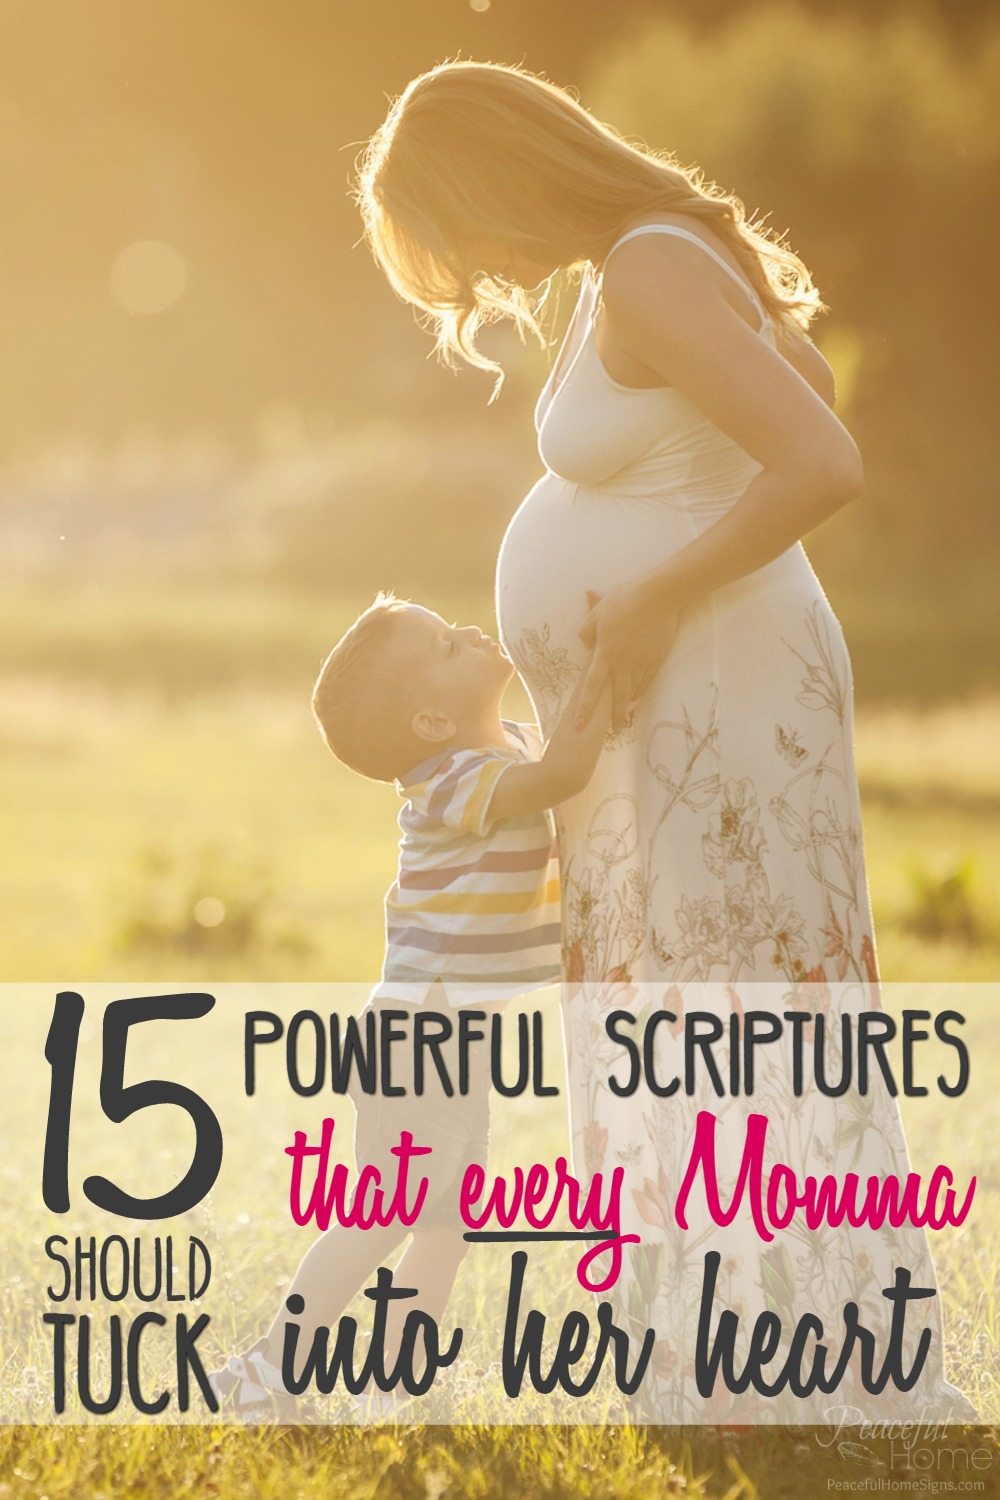 While the heroine of our story is strong and beautiful, she carries many hidden burdens. She pours out from every reserve within herself, and rarely stops to refill. Thank goodness we serve a God who is a fount of living water springing up so we never run completely dry. Visit here to be encouraged. | Scriptures for motherhood | Scriptures for moms | Bible verses for mothers | Christian encouragement for Moms | Faith and Motherhood | What does God say about Moms?